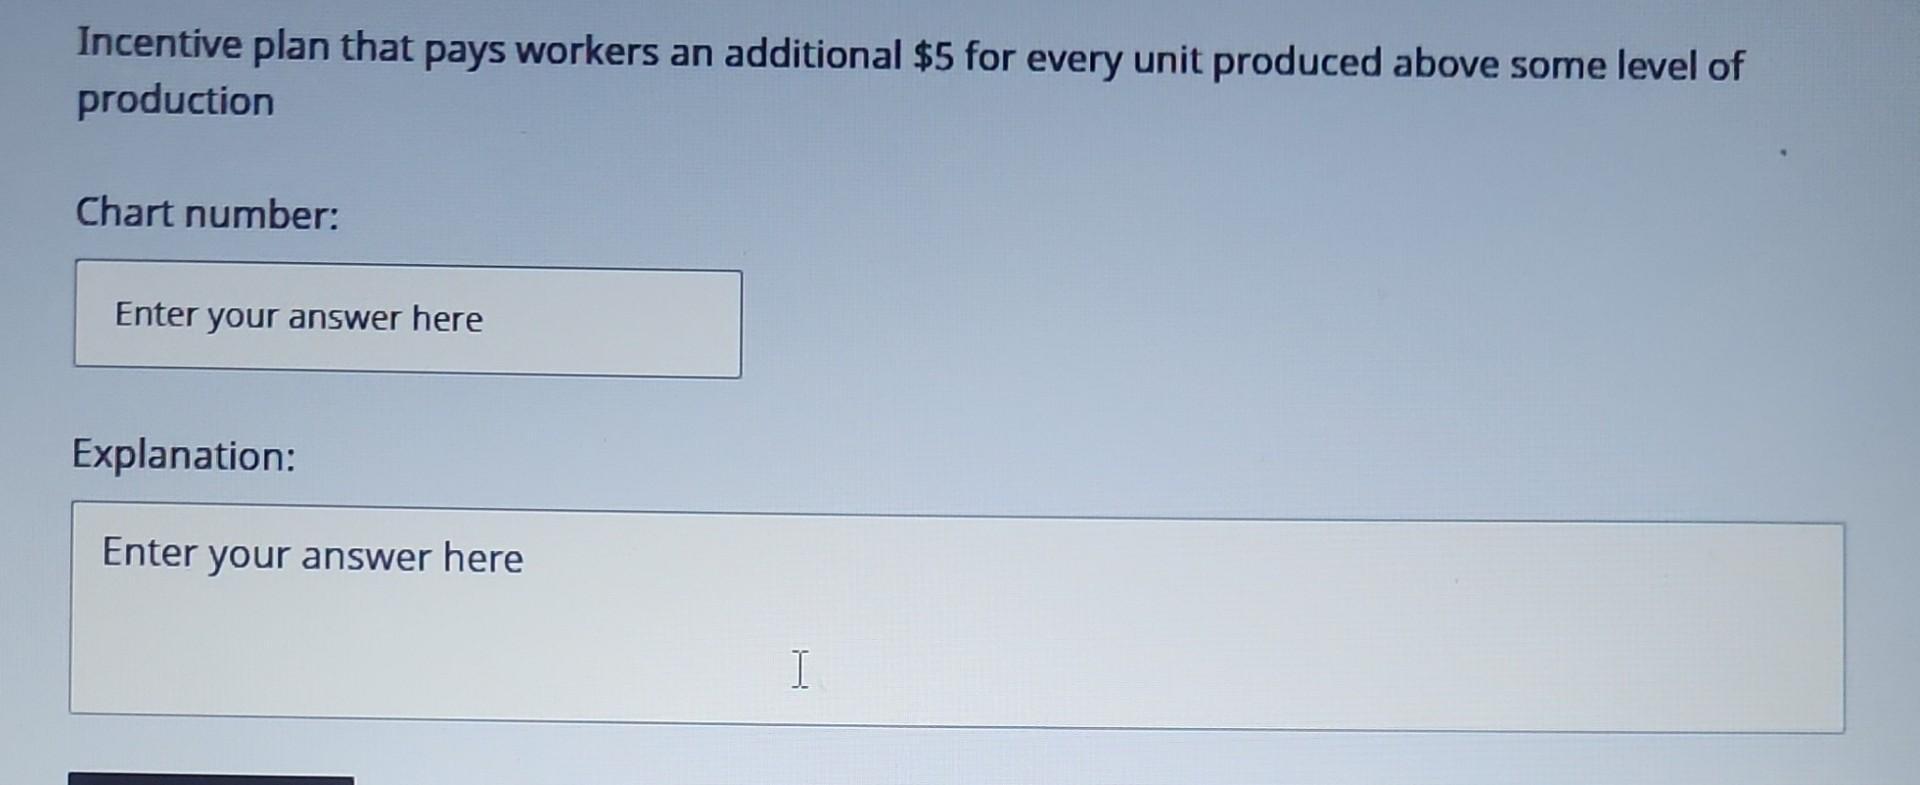 Incentive plan that pays workers an additional ( $ 5 ) for every unit produced above some level of productionChart number